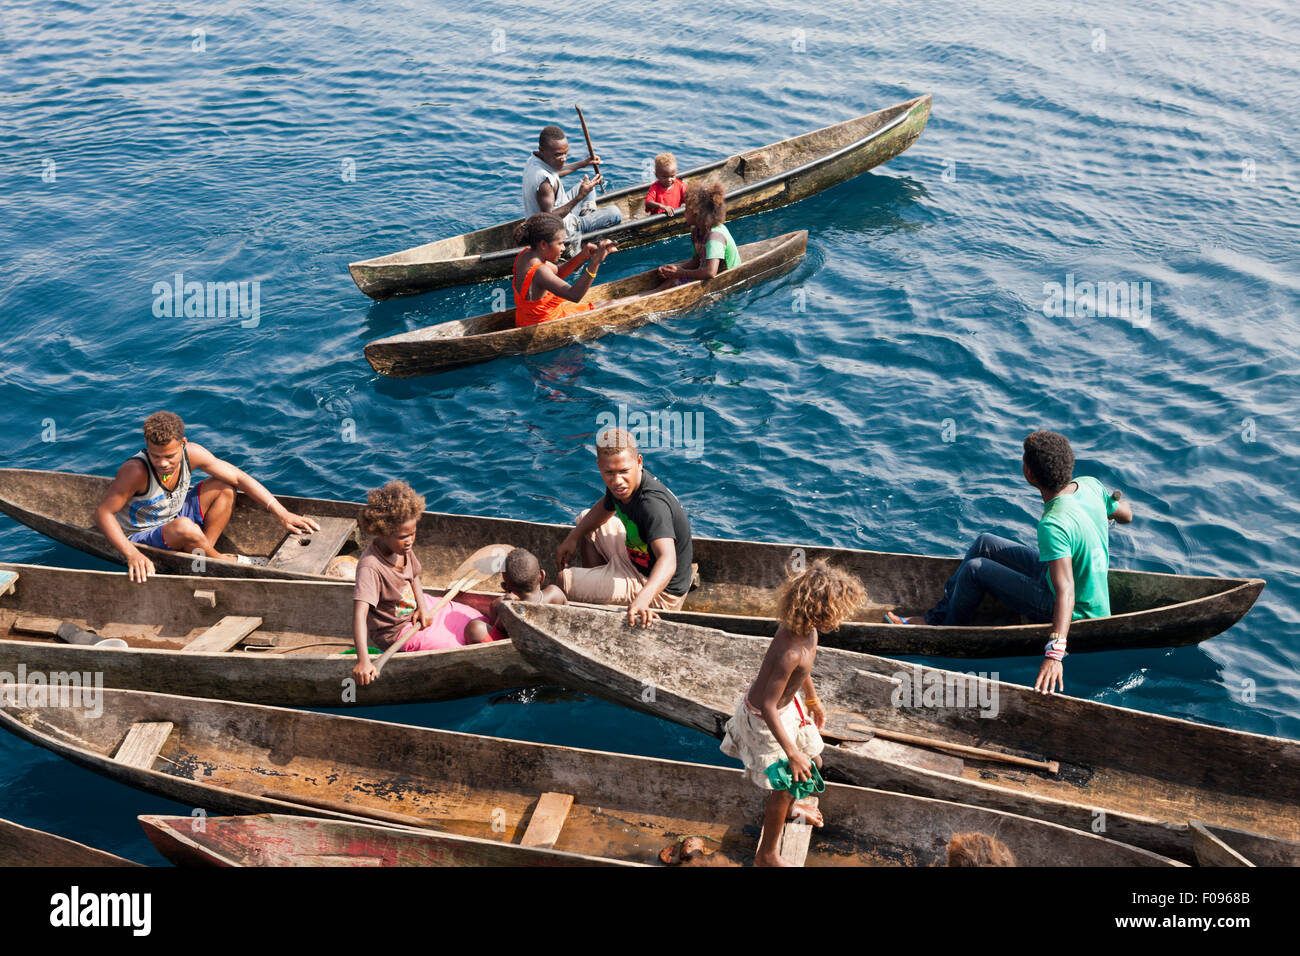 Local People in typical Dugout Canoe, Florida Islands, Solomon Islands Stock Photo